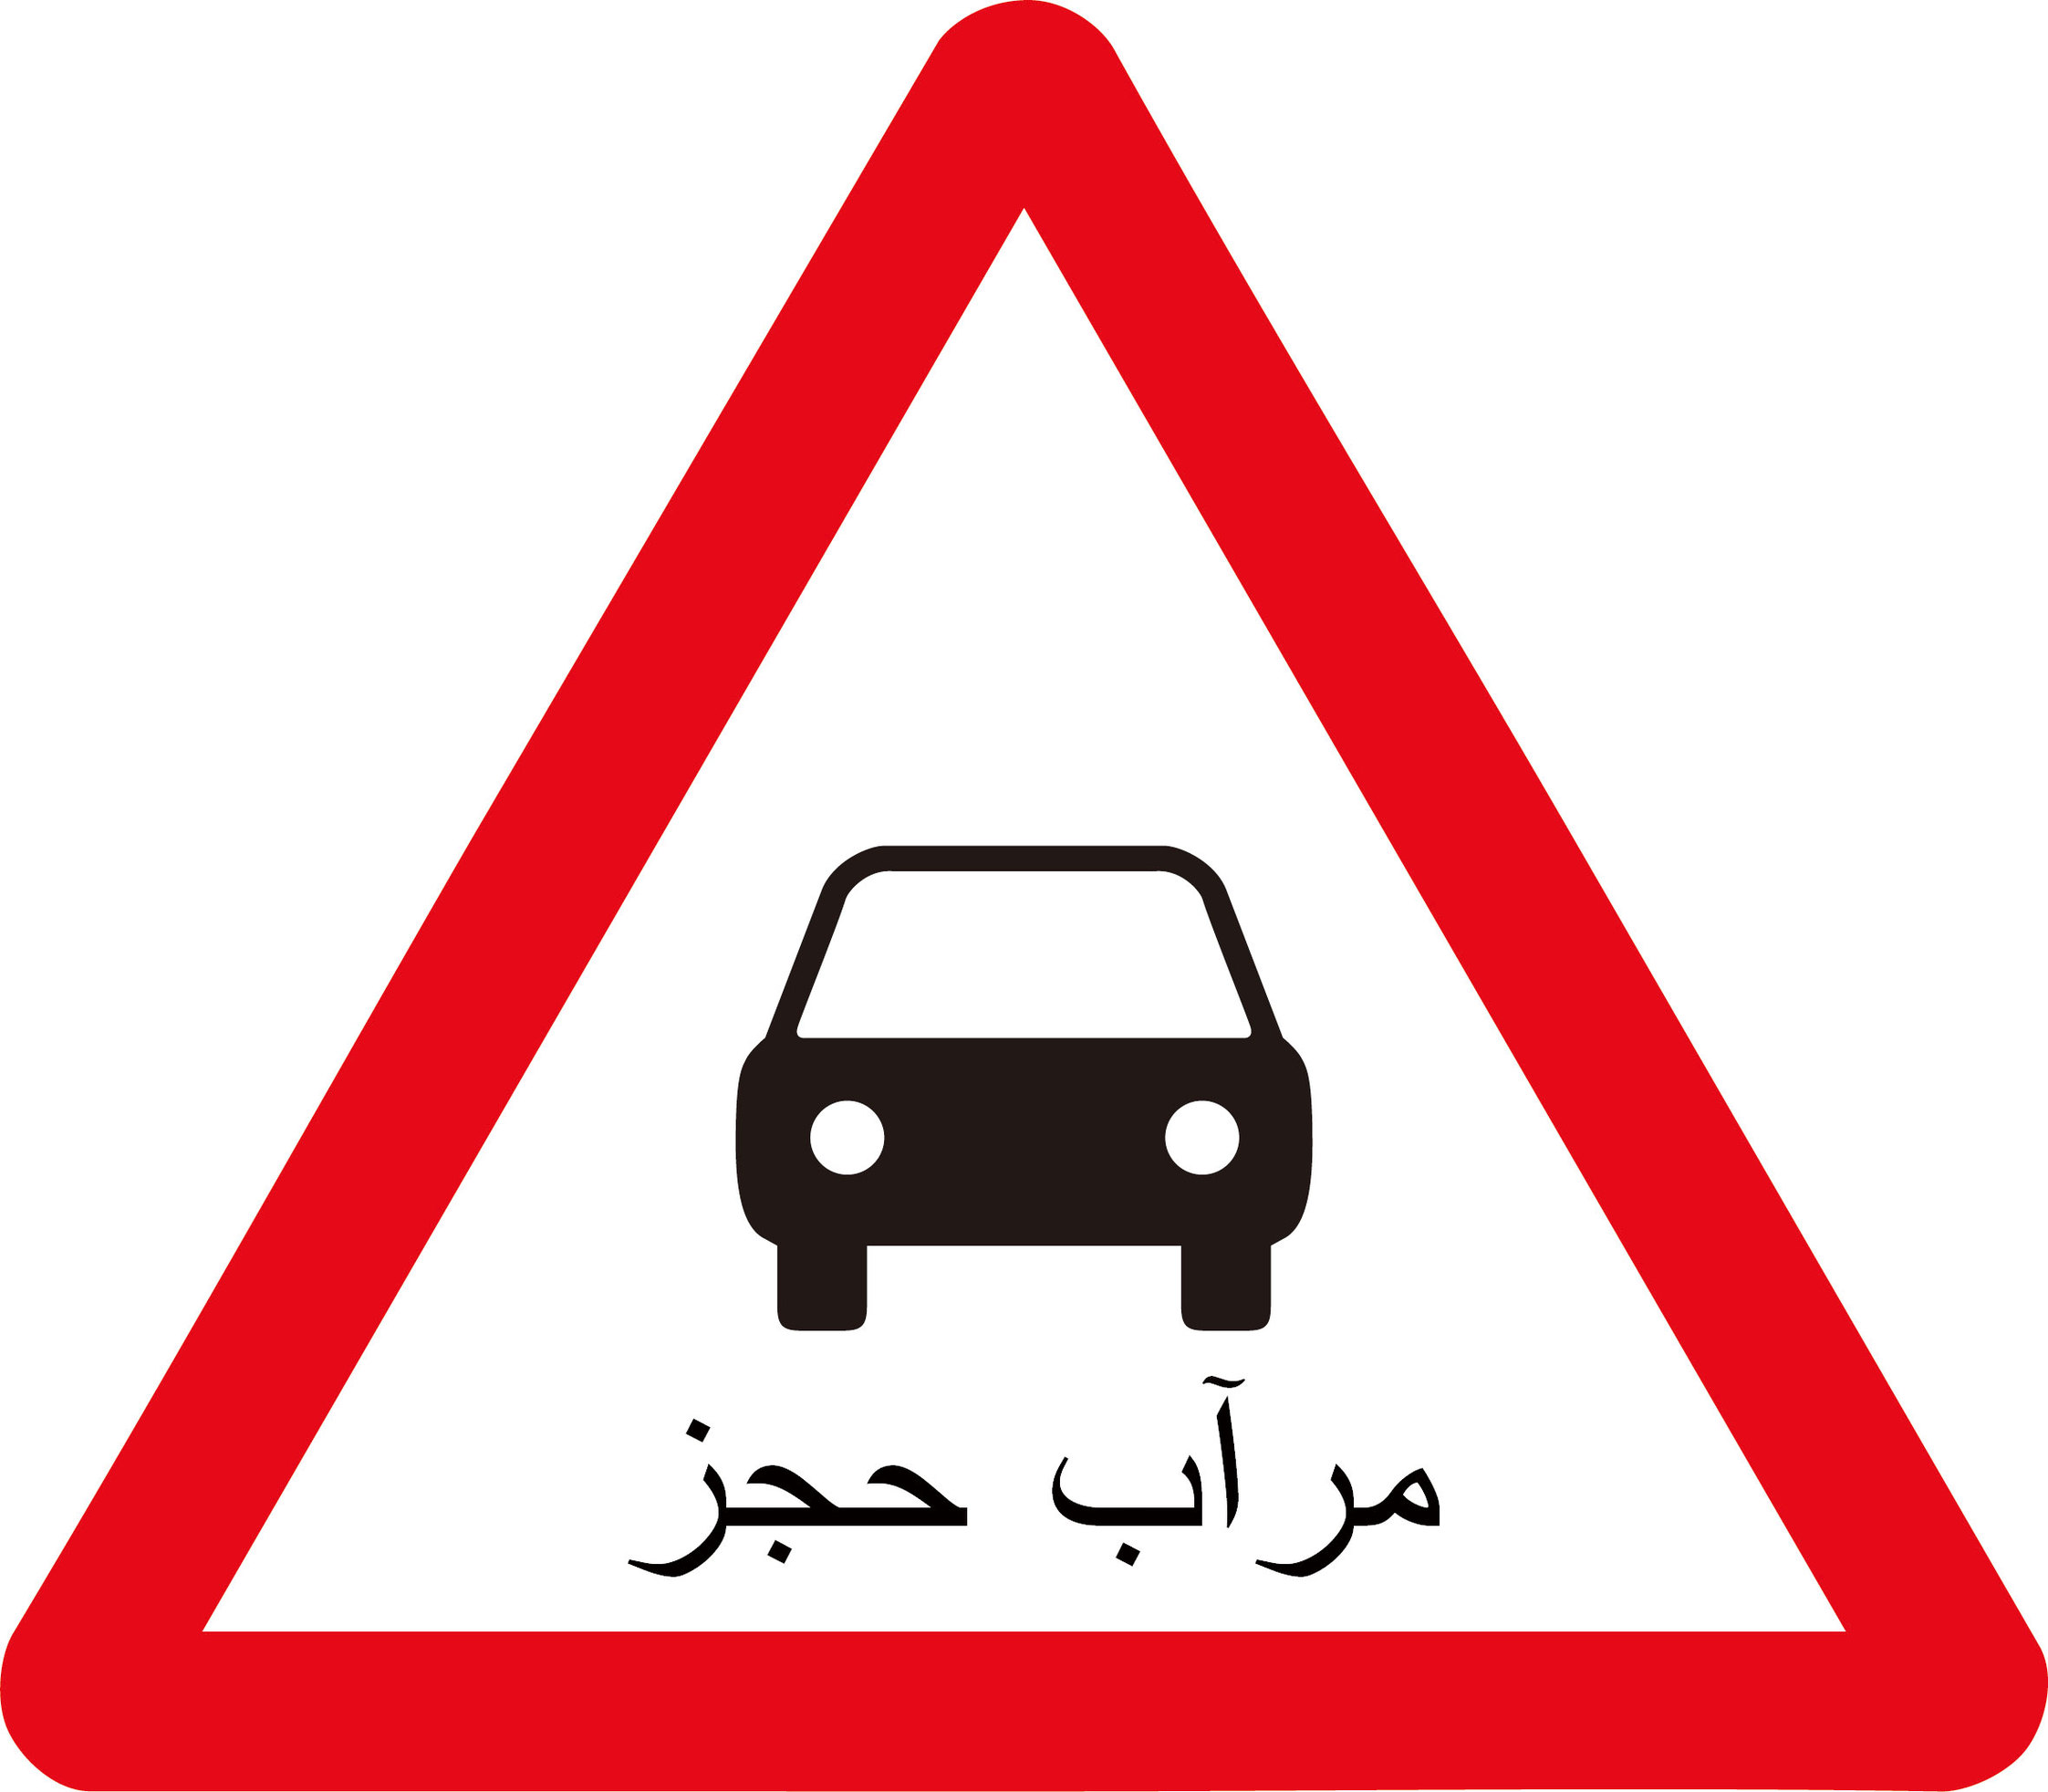 Road Safety Signs Clipart - Free to use Clip Art Resource